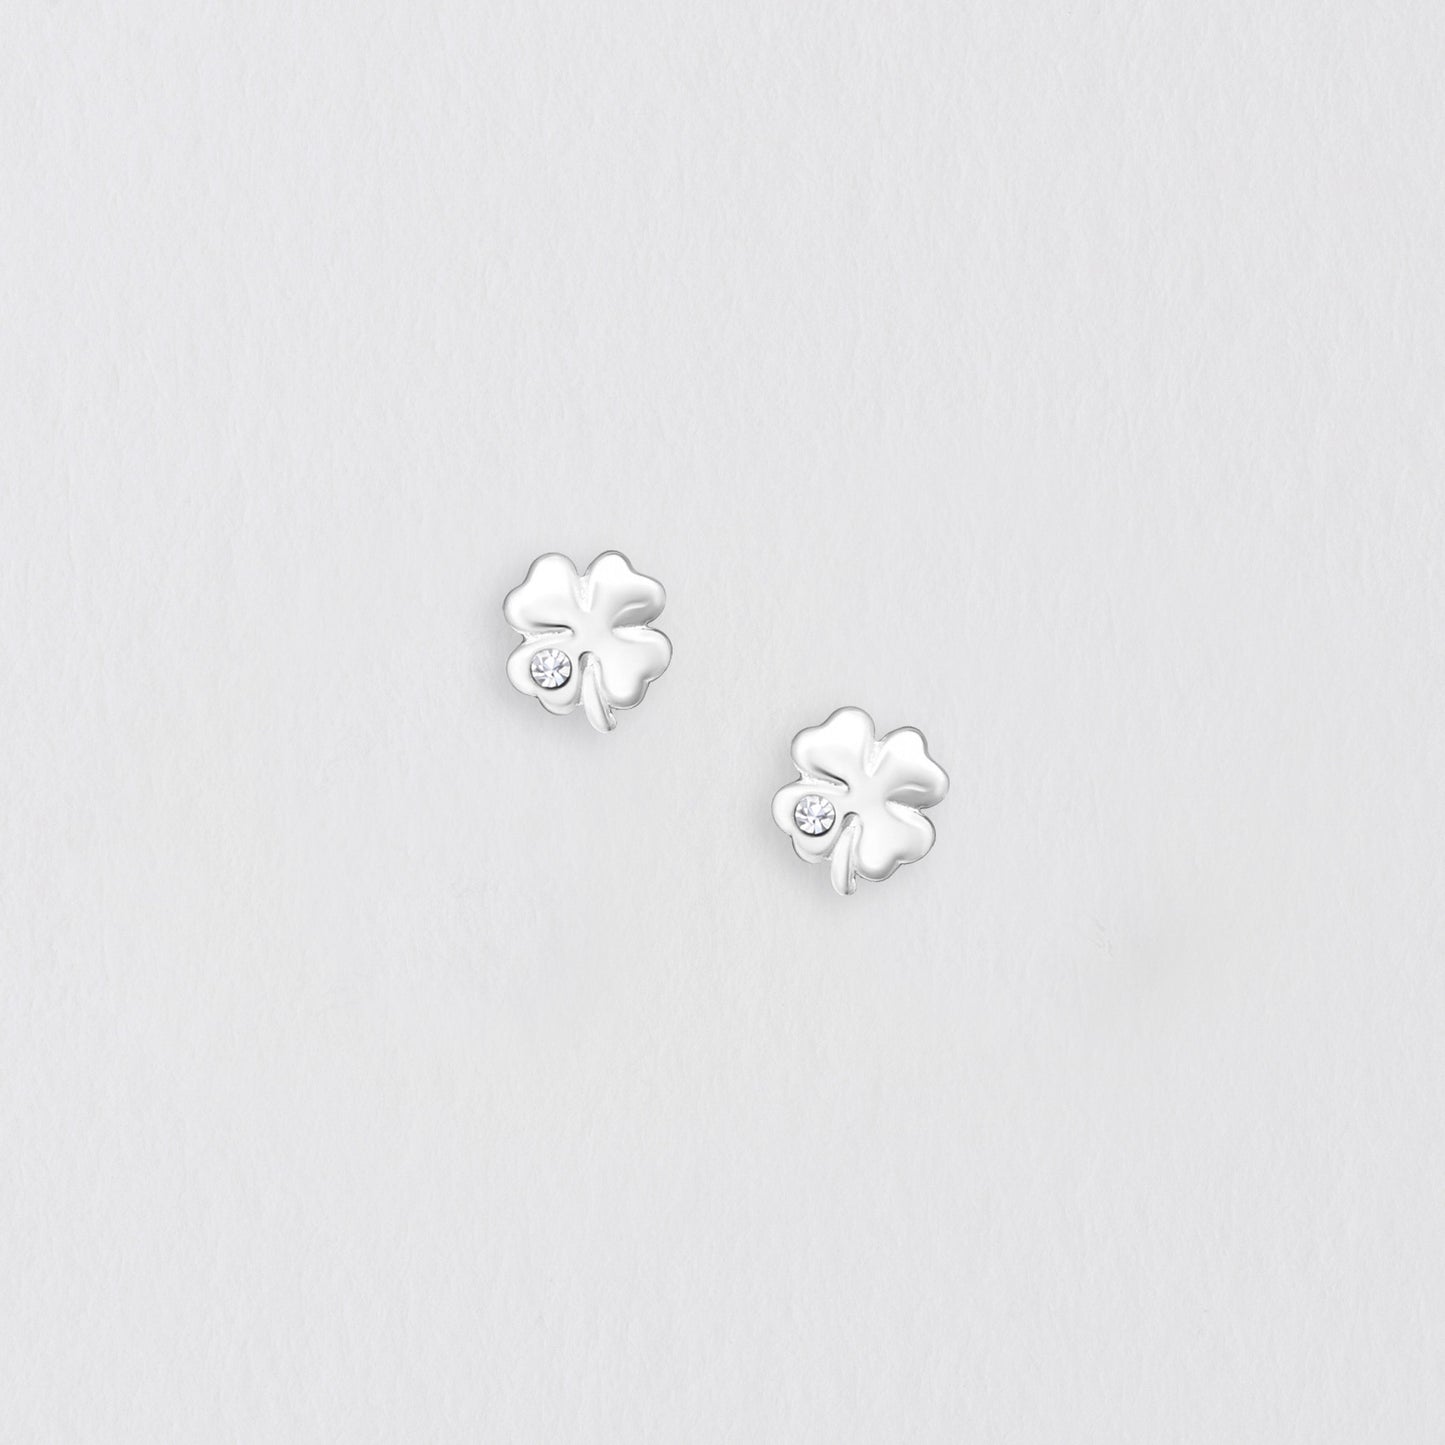 Clover And Crystal Silver Earring Stud Earrings Crumble and Core   